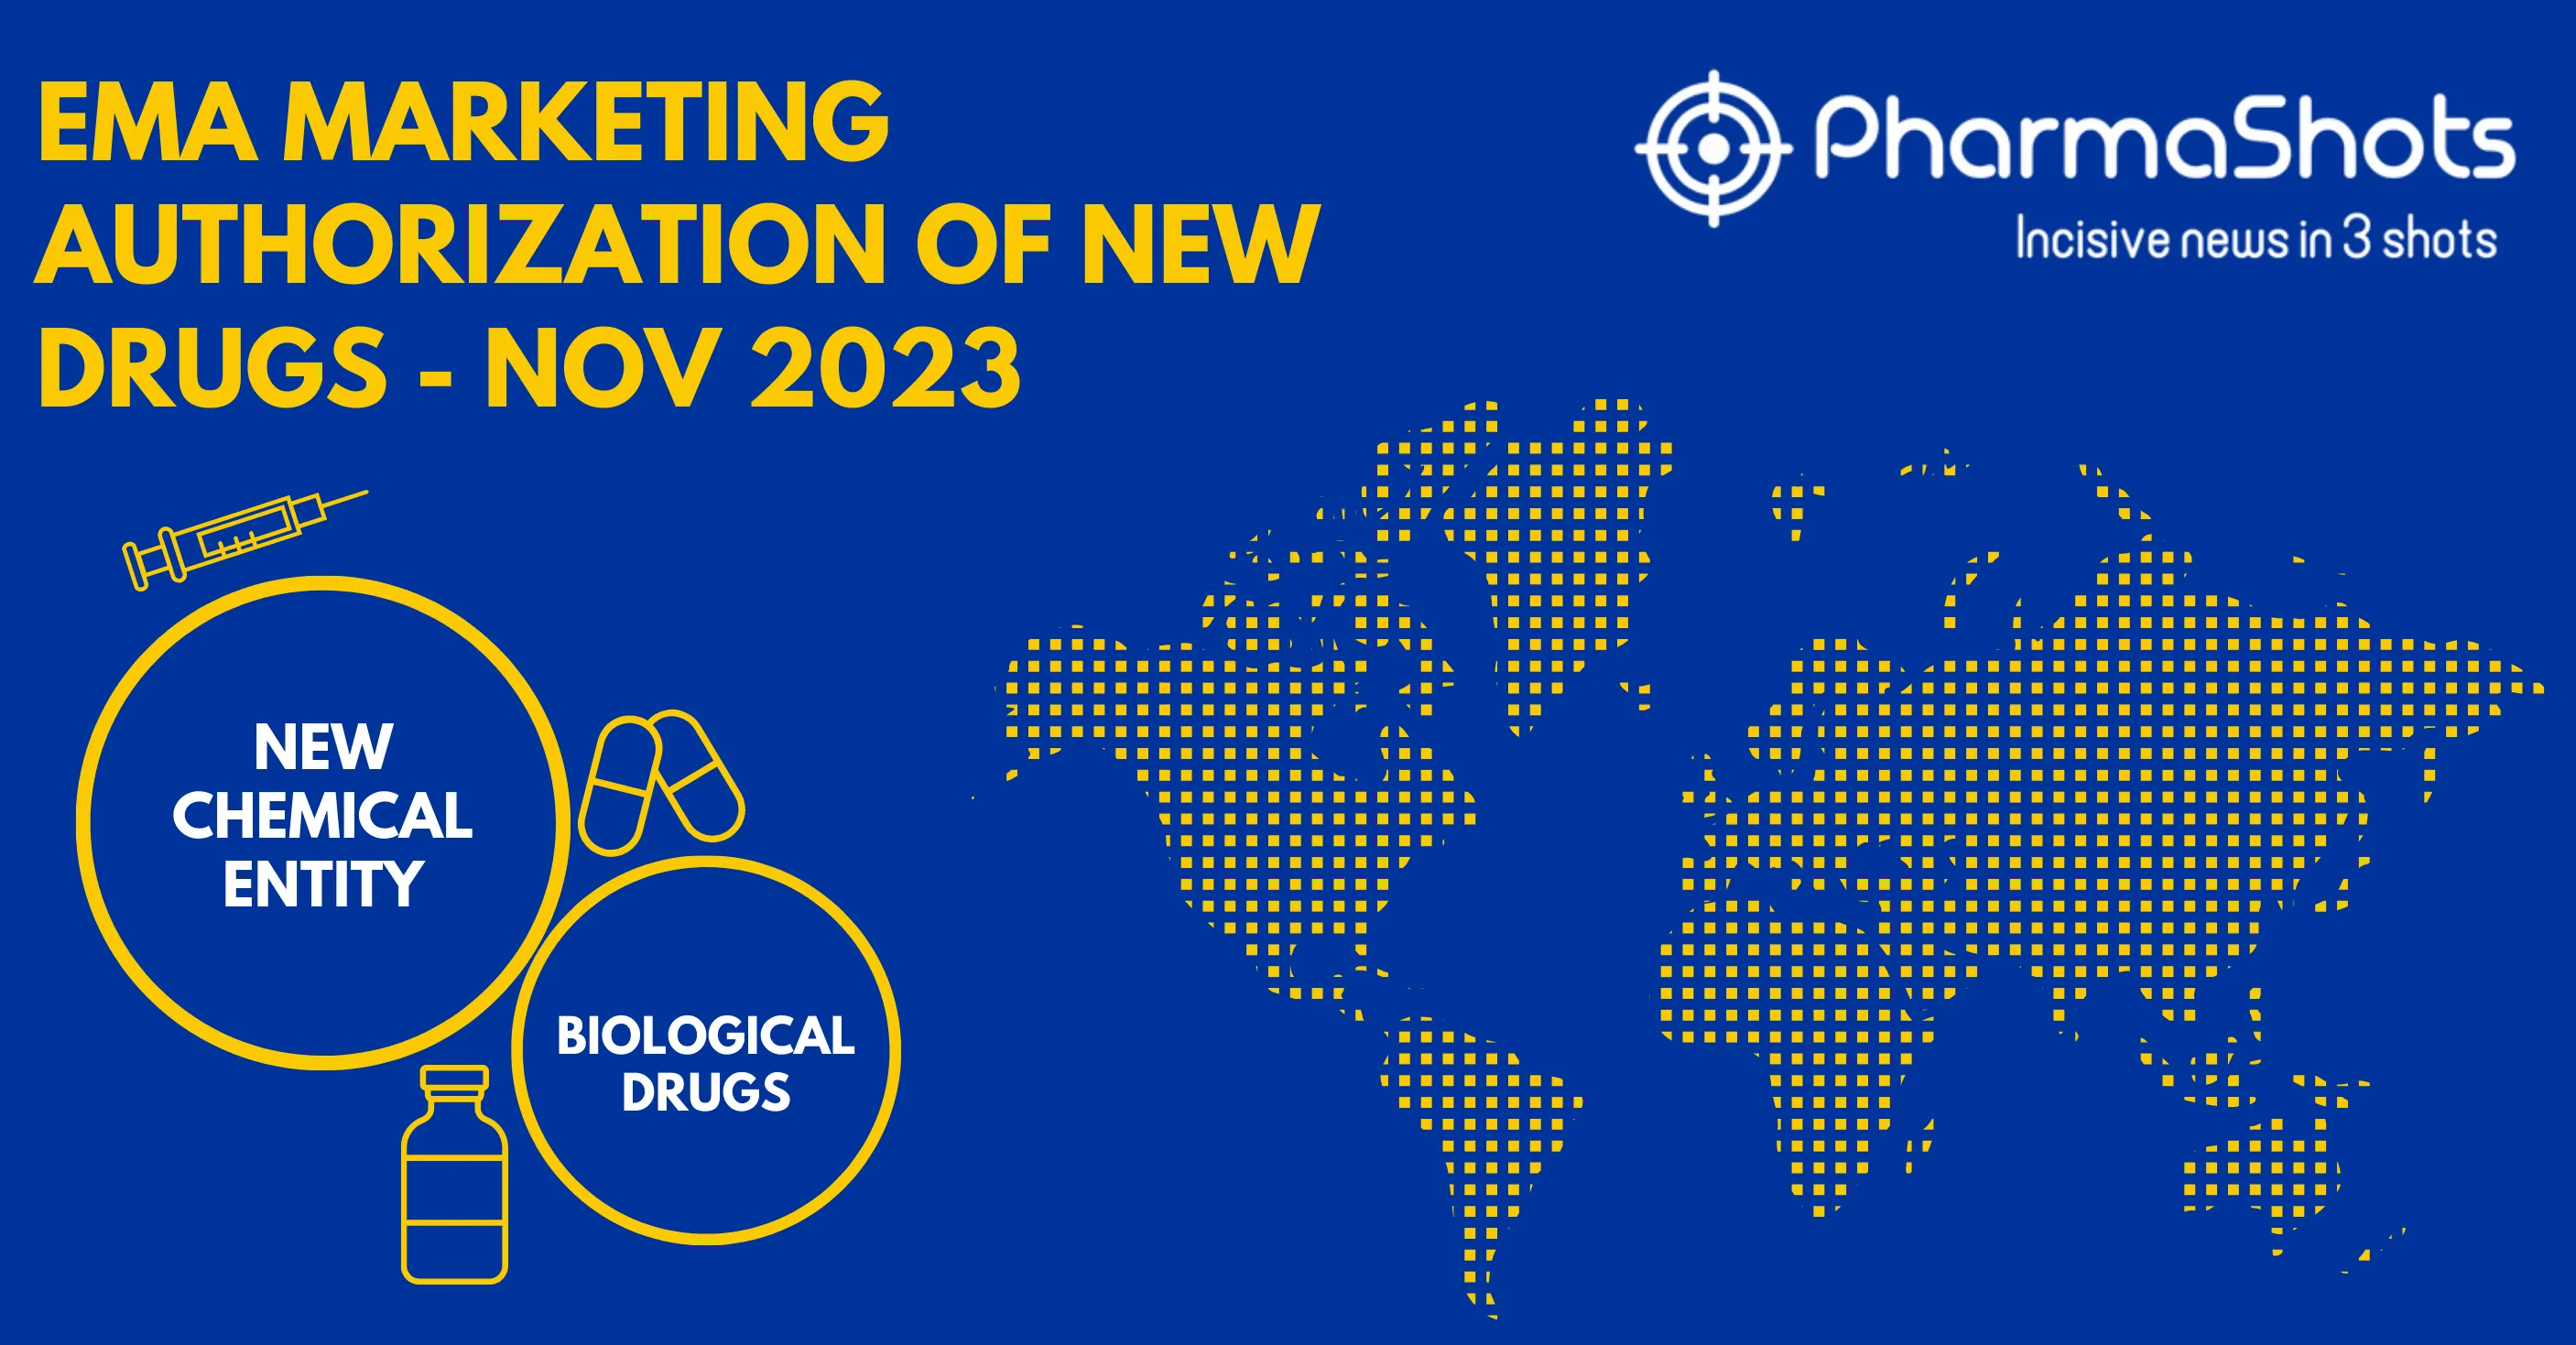 Insights+: EMA Marketing Authorization of New Drugs in November 2023